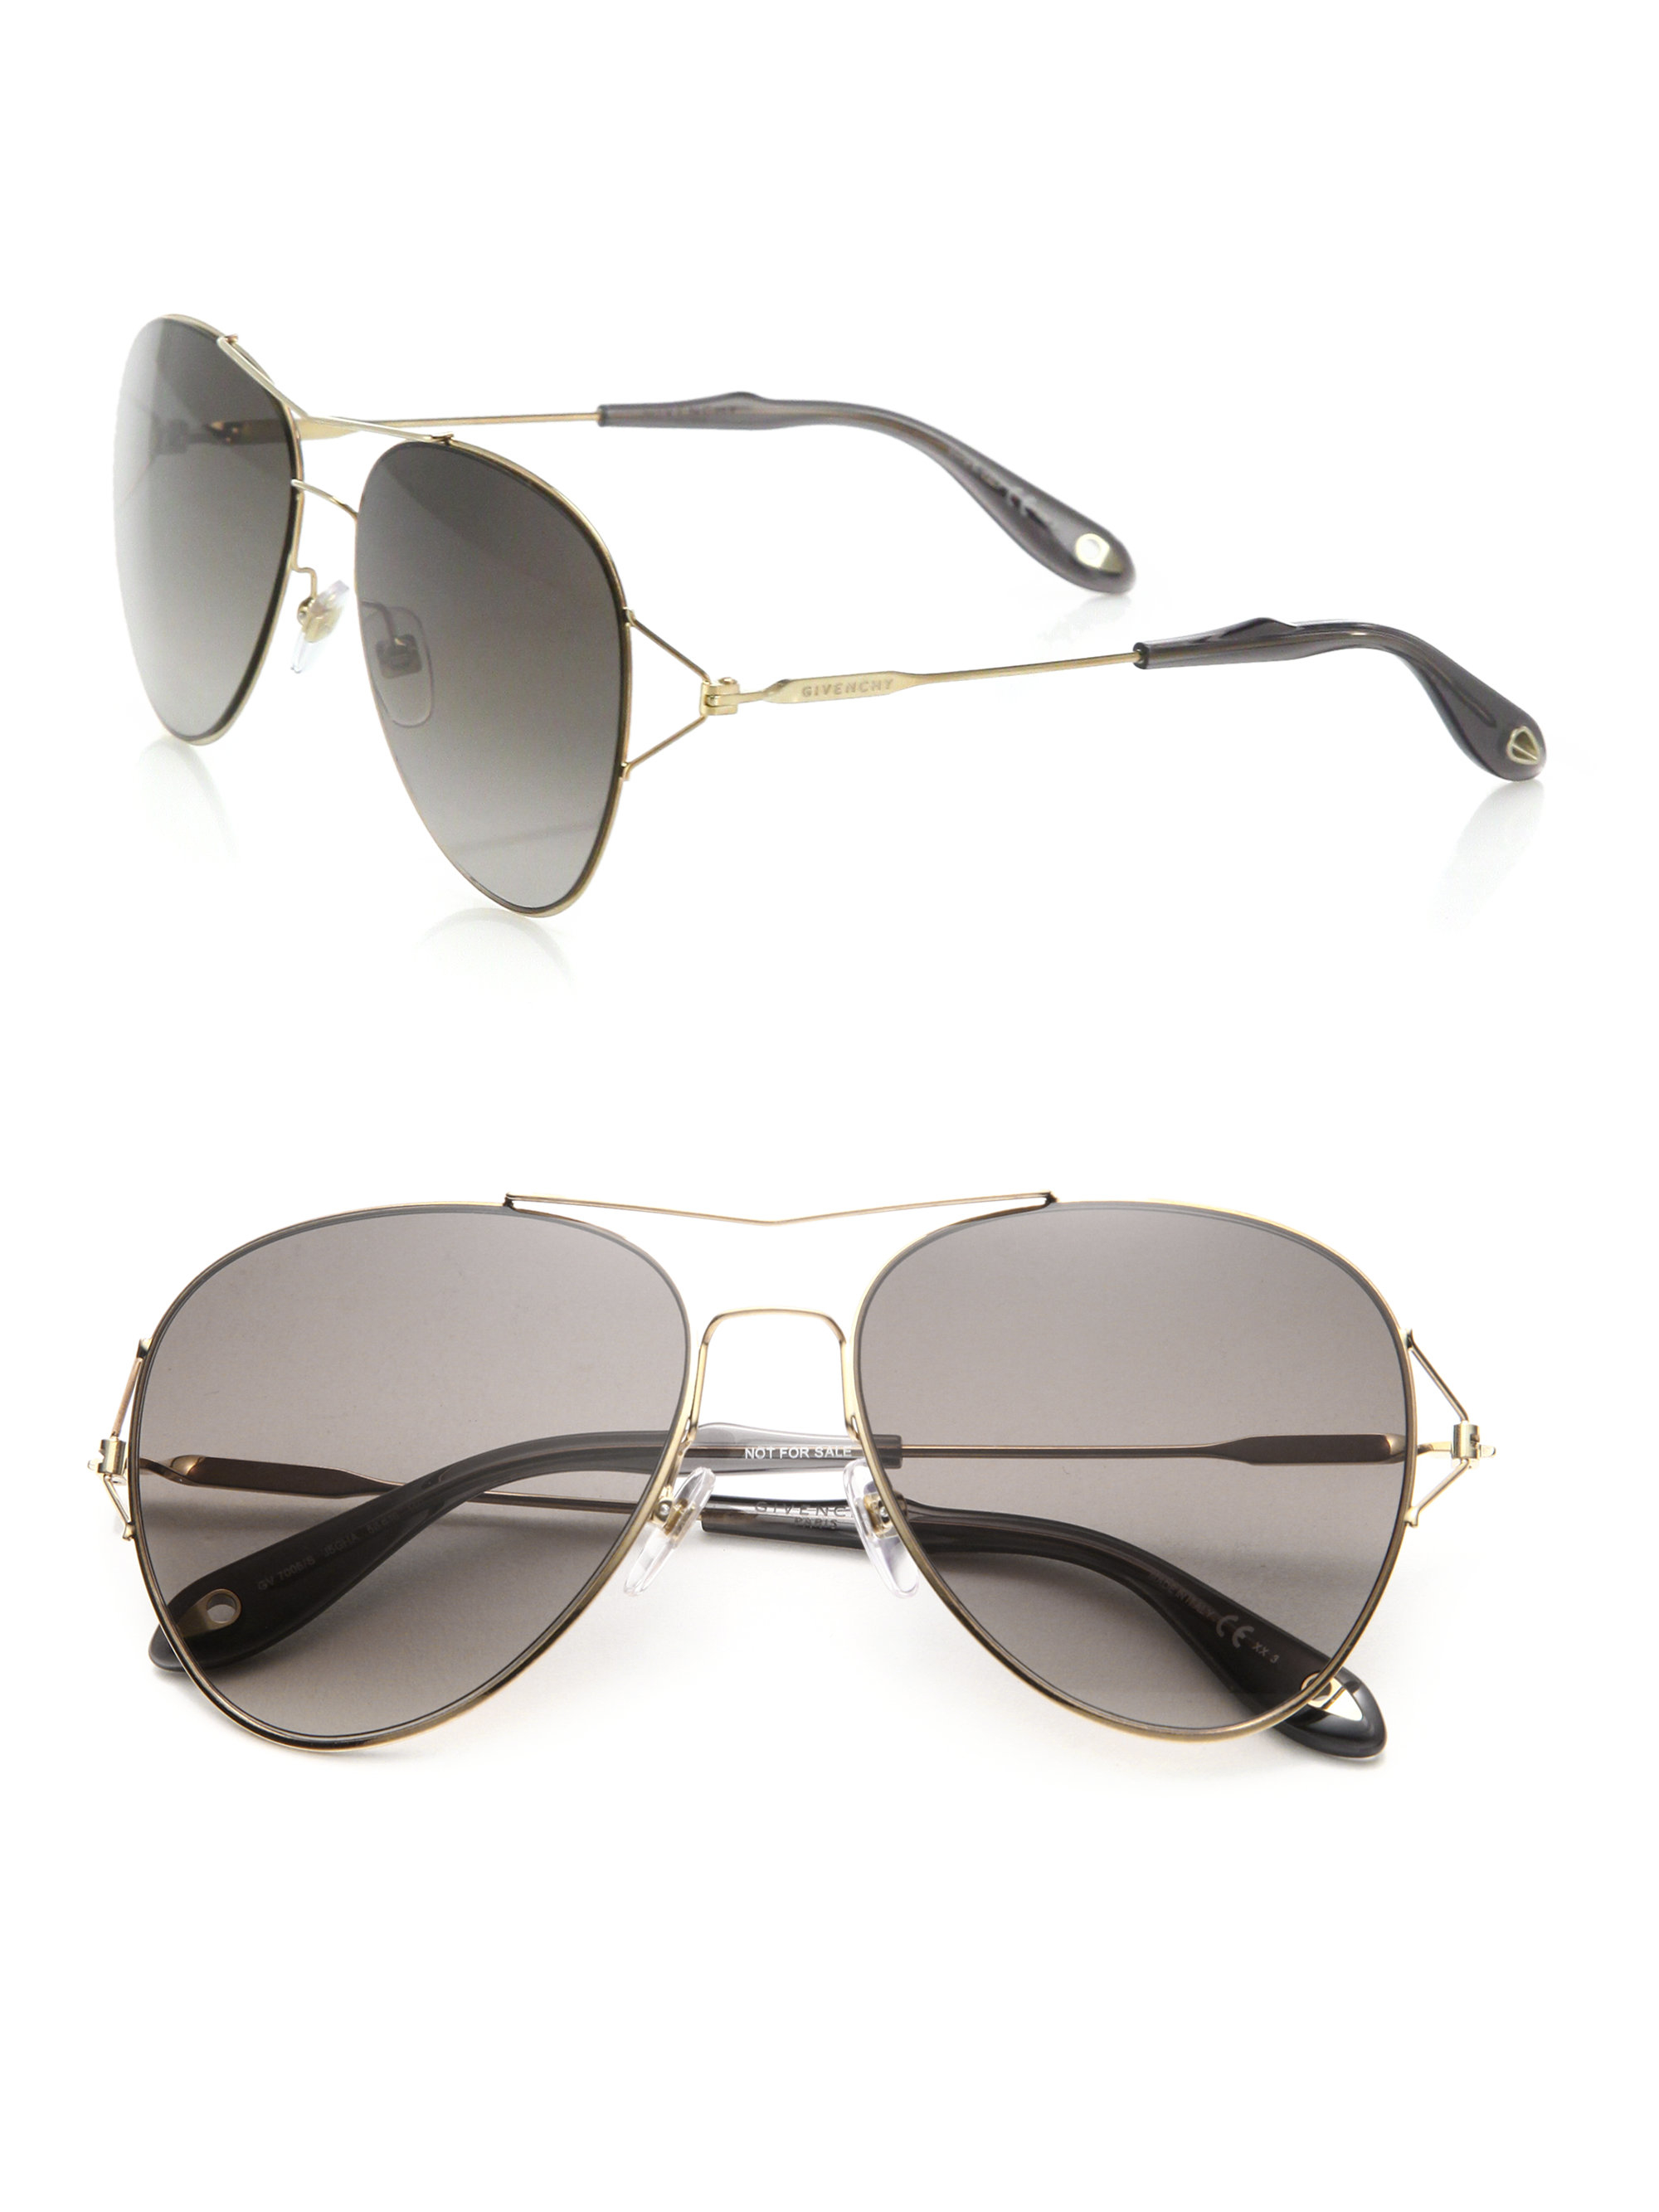 Givenchy Sunglasses Up To 75 Off Lowest Price On Givenchy Sunglasses